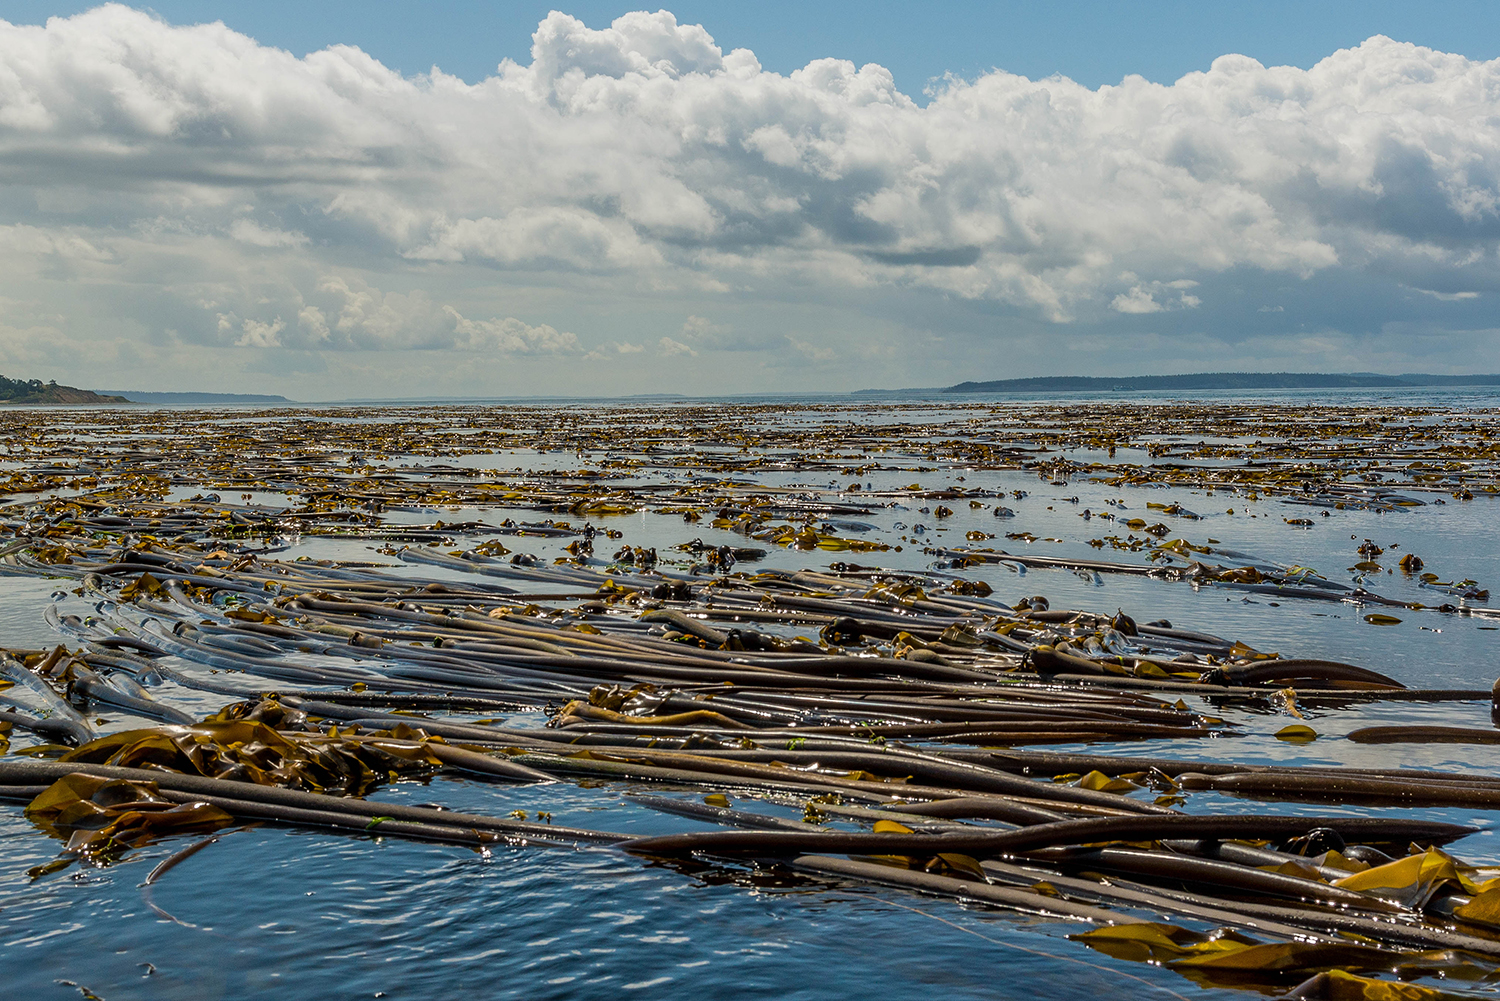 Photo of a bull kelp forest in the water by Ebey's Landing. Photo credit: Rich Yukubousky.